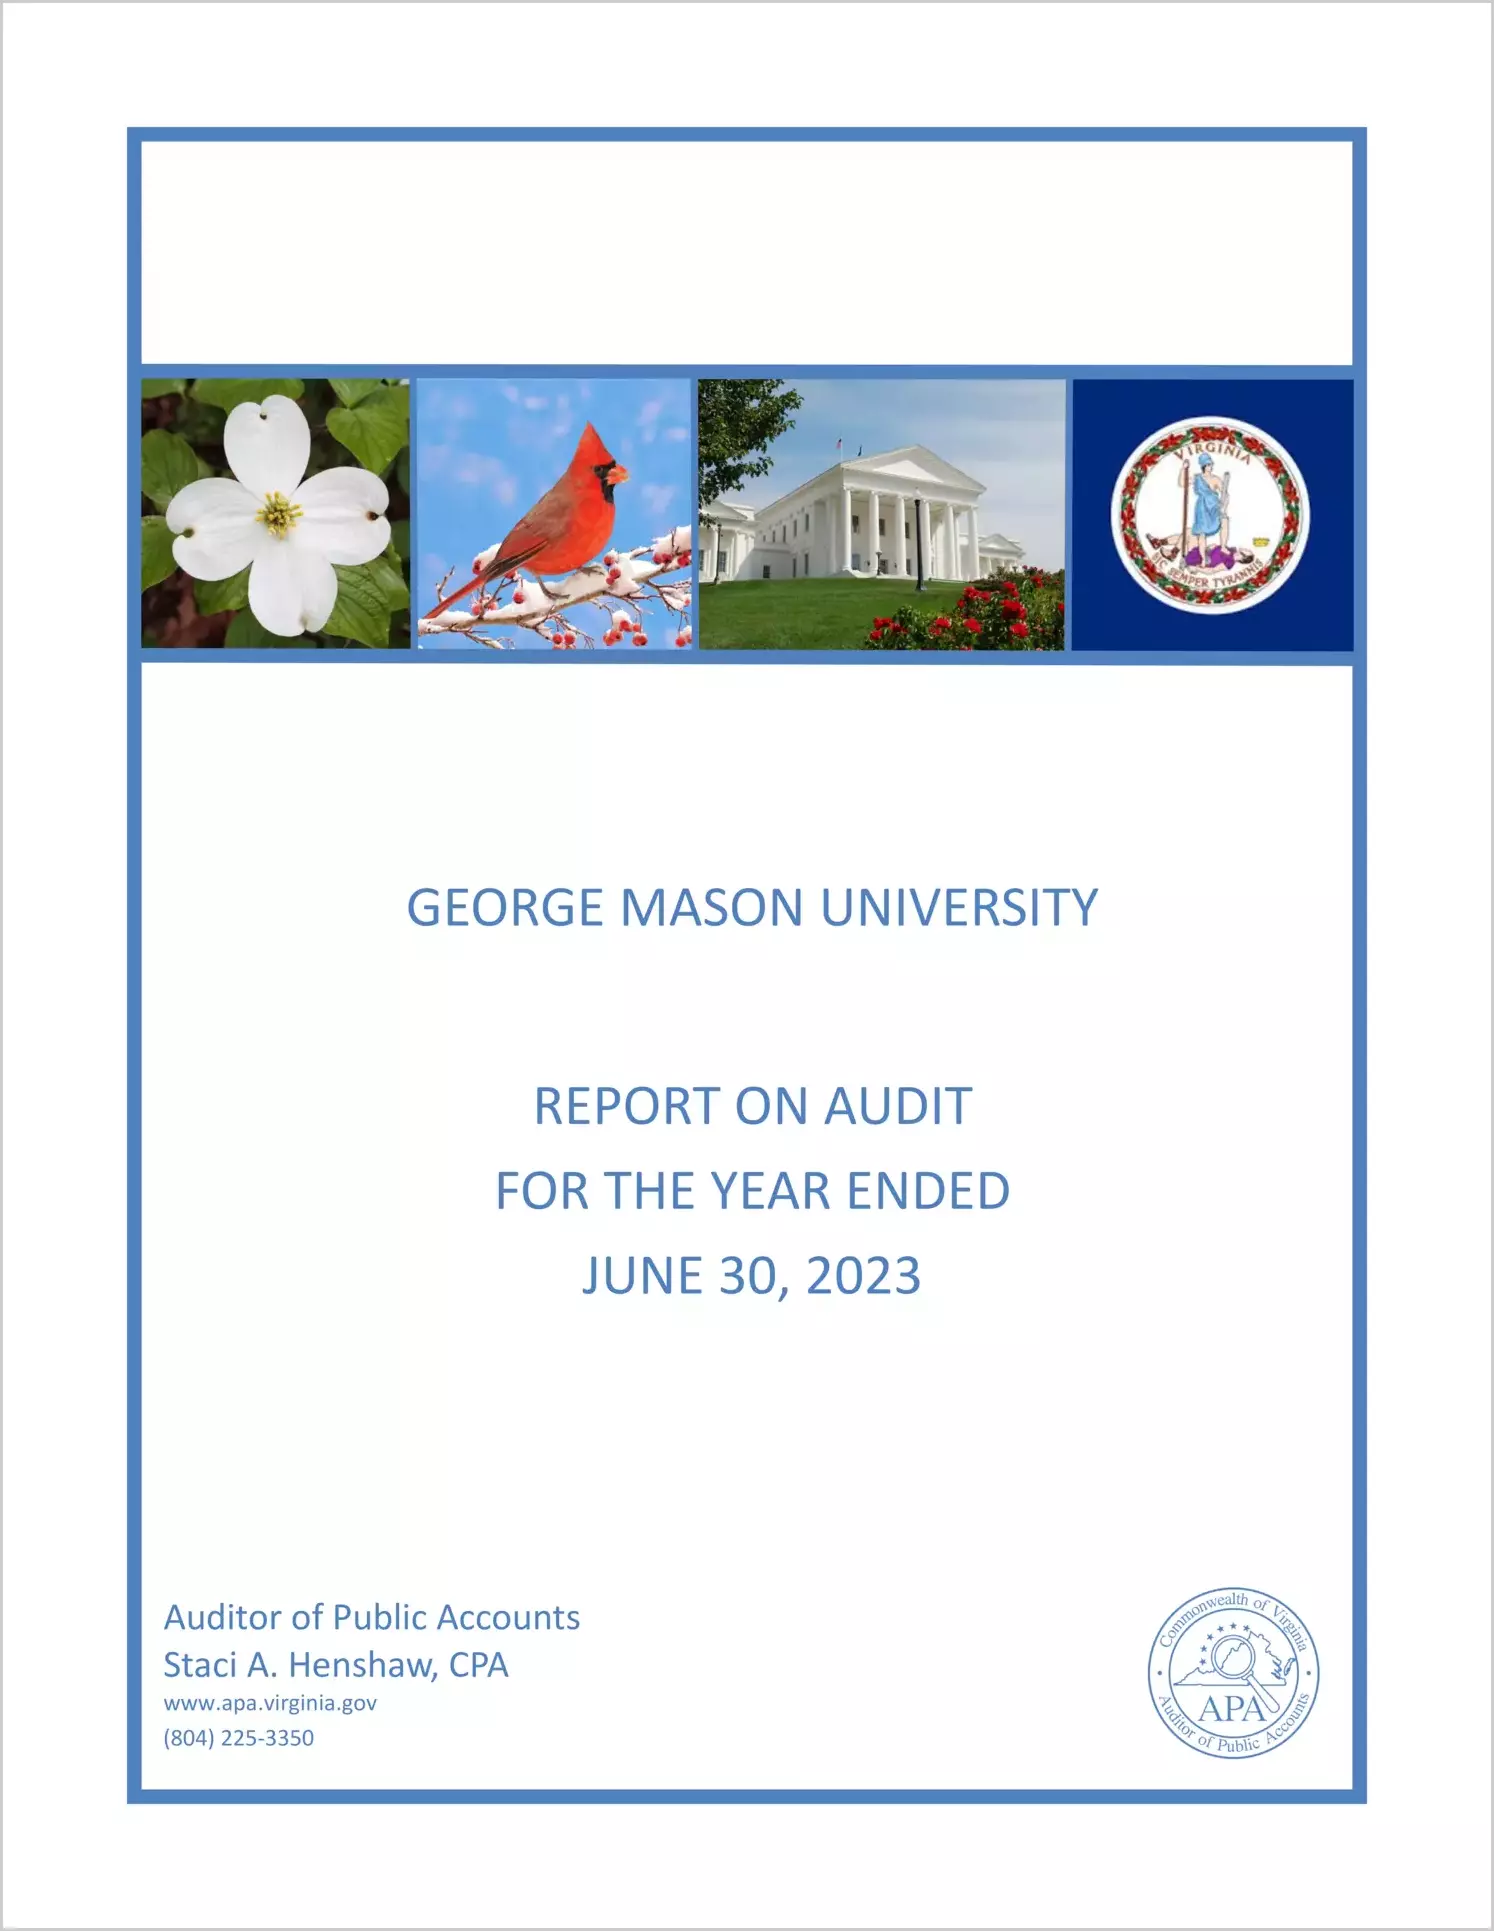 George Mason University for the year ended June 30, 2023